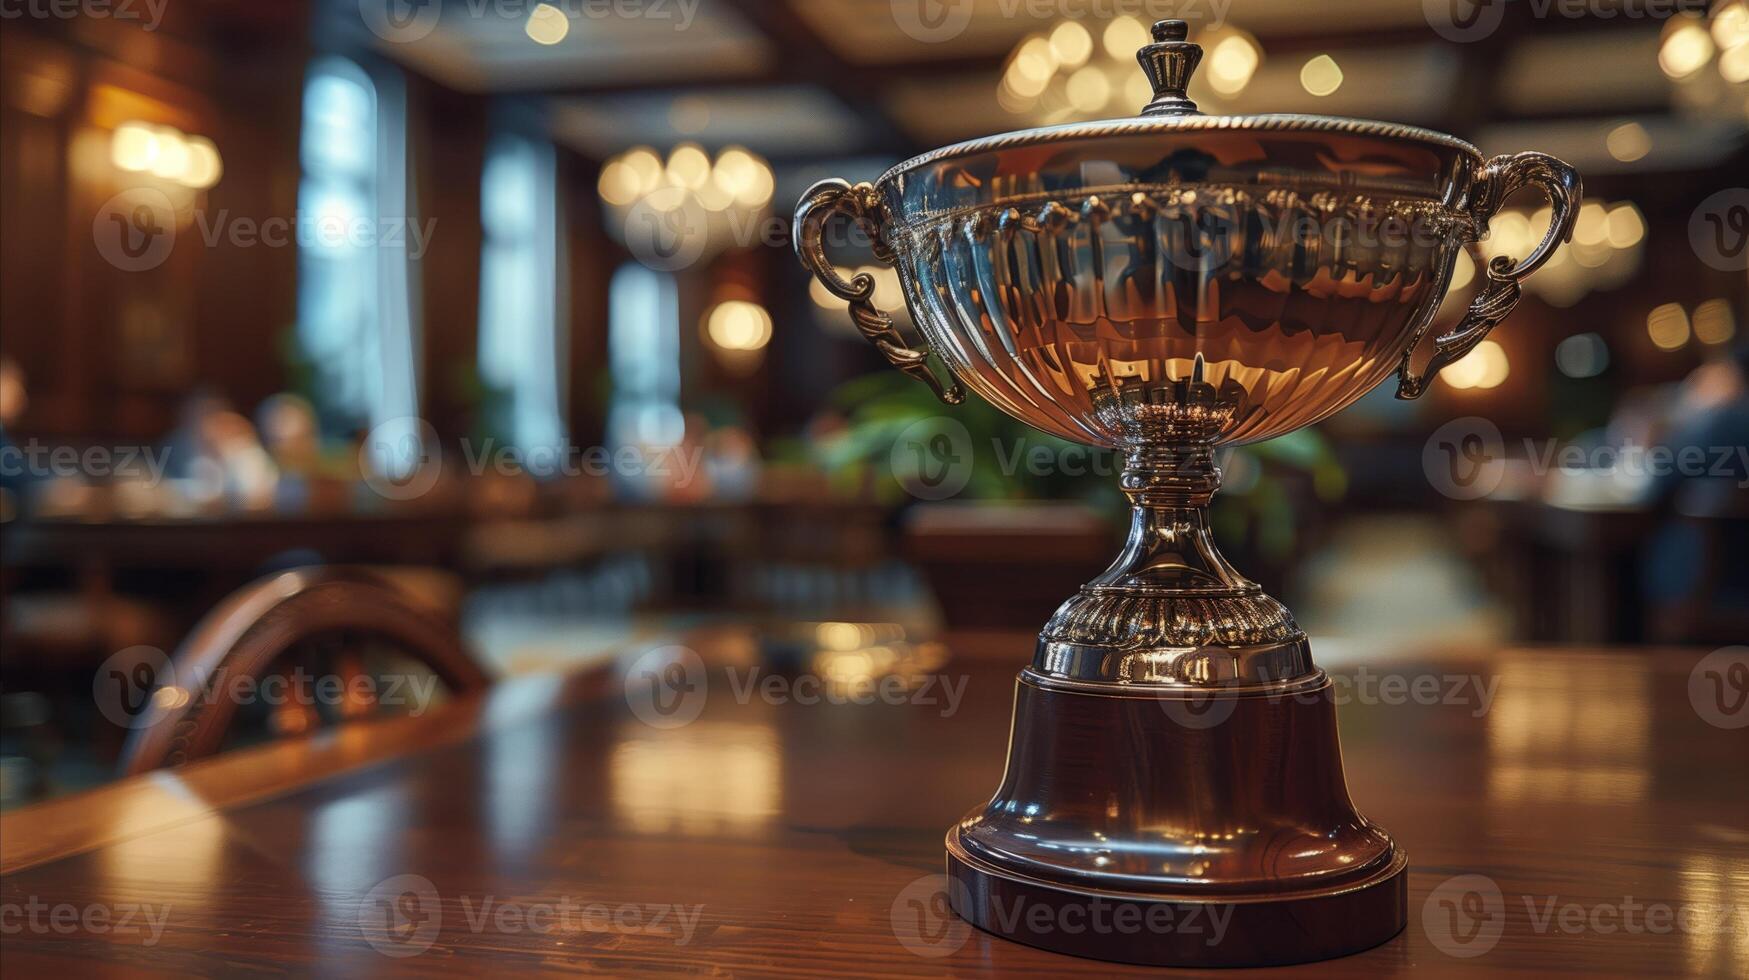 Elegant Trophy Displayed on Wooden Table in Dimly-Lit Room photo